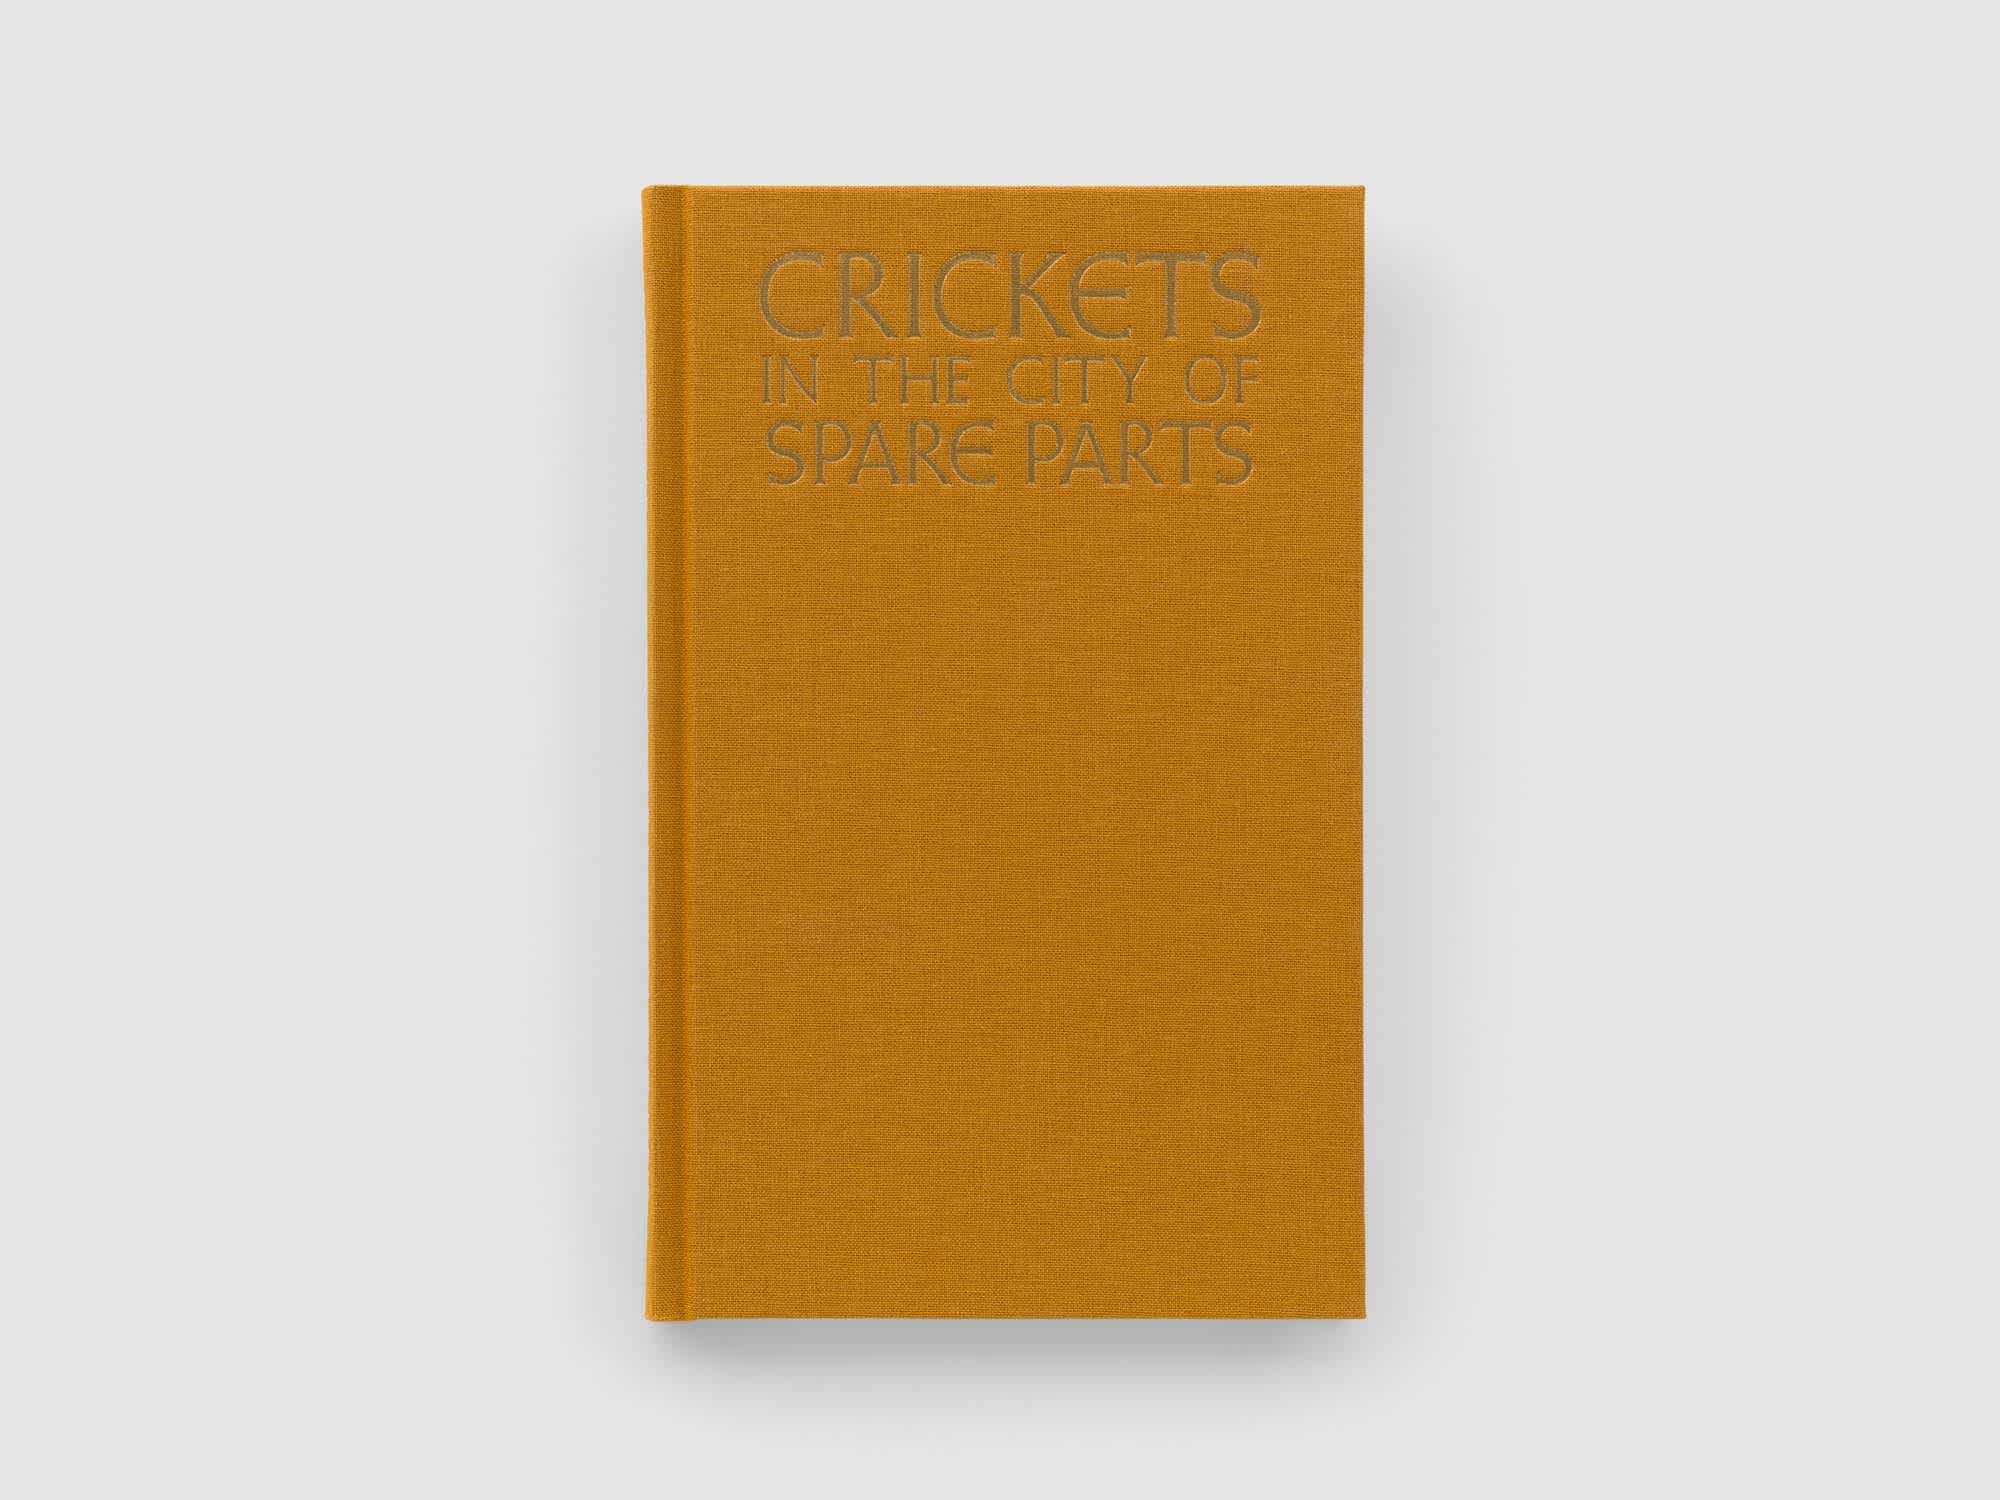 Burnt orange book cover with gold embossed title at the top.